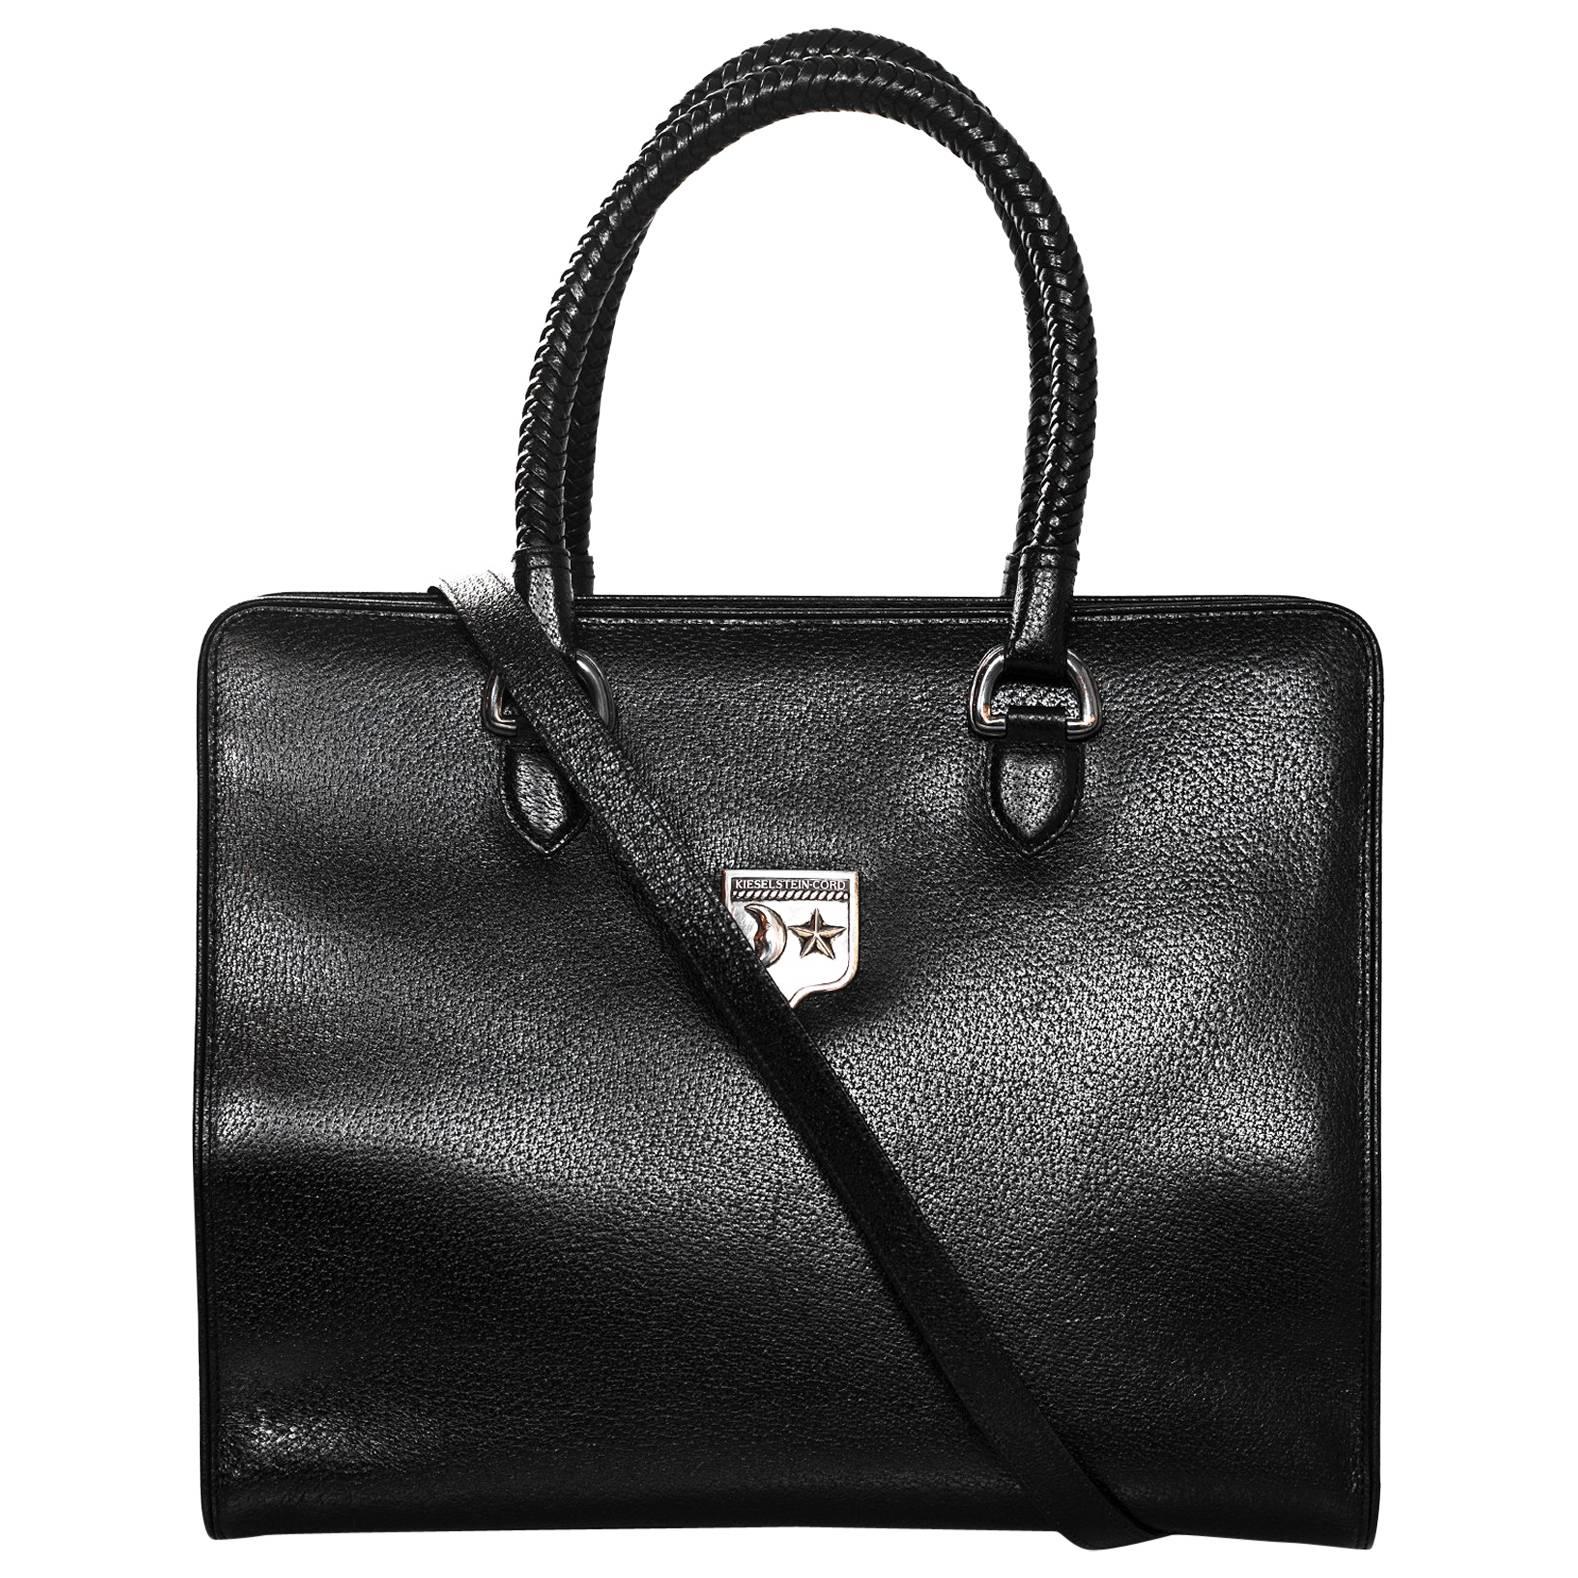 Kieselstein-Cord Large Black Work Tote with Sterling Silver Hardware